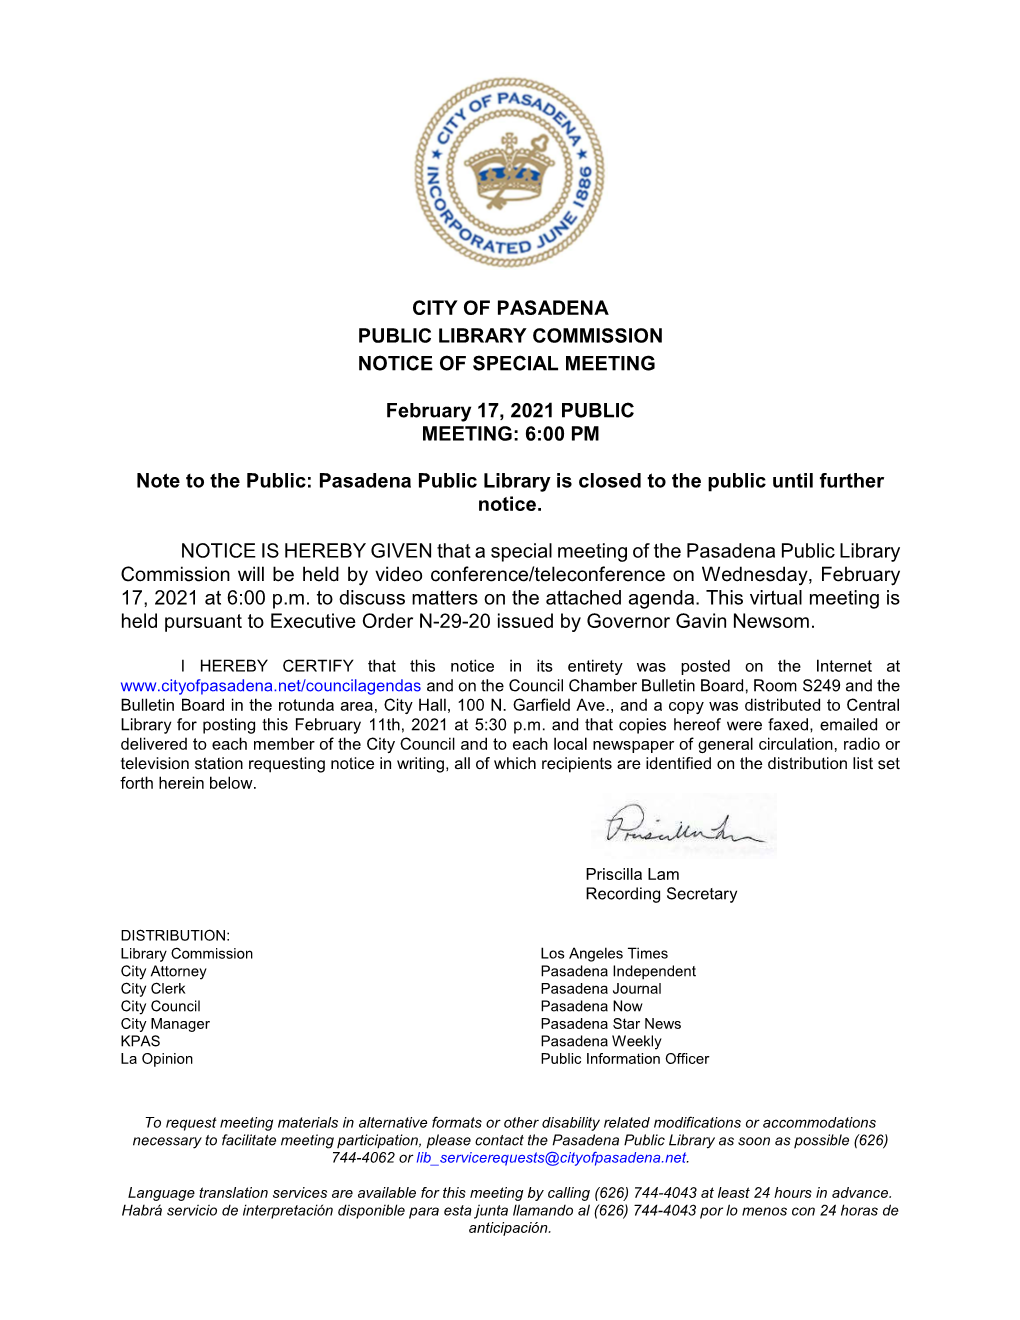 City of Pasadena Public Library Commission Notice of Special Meeting